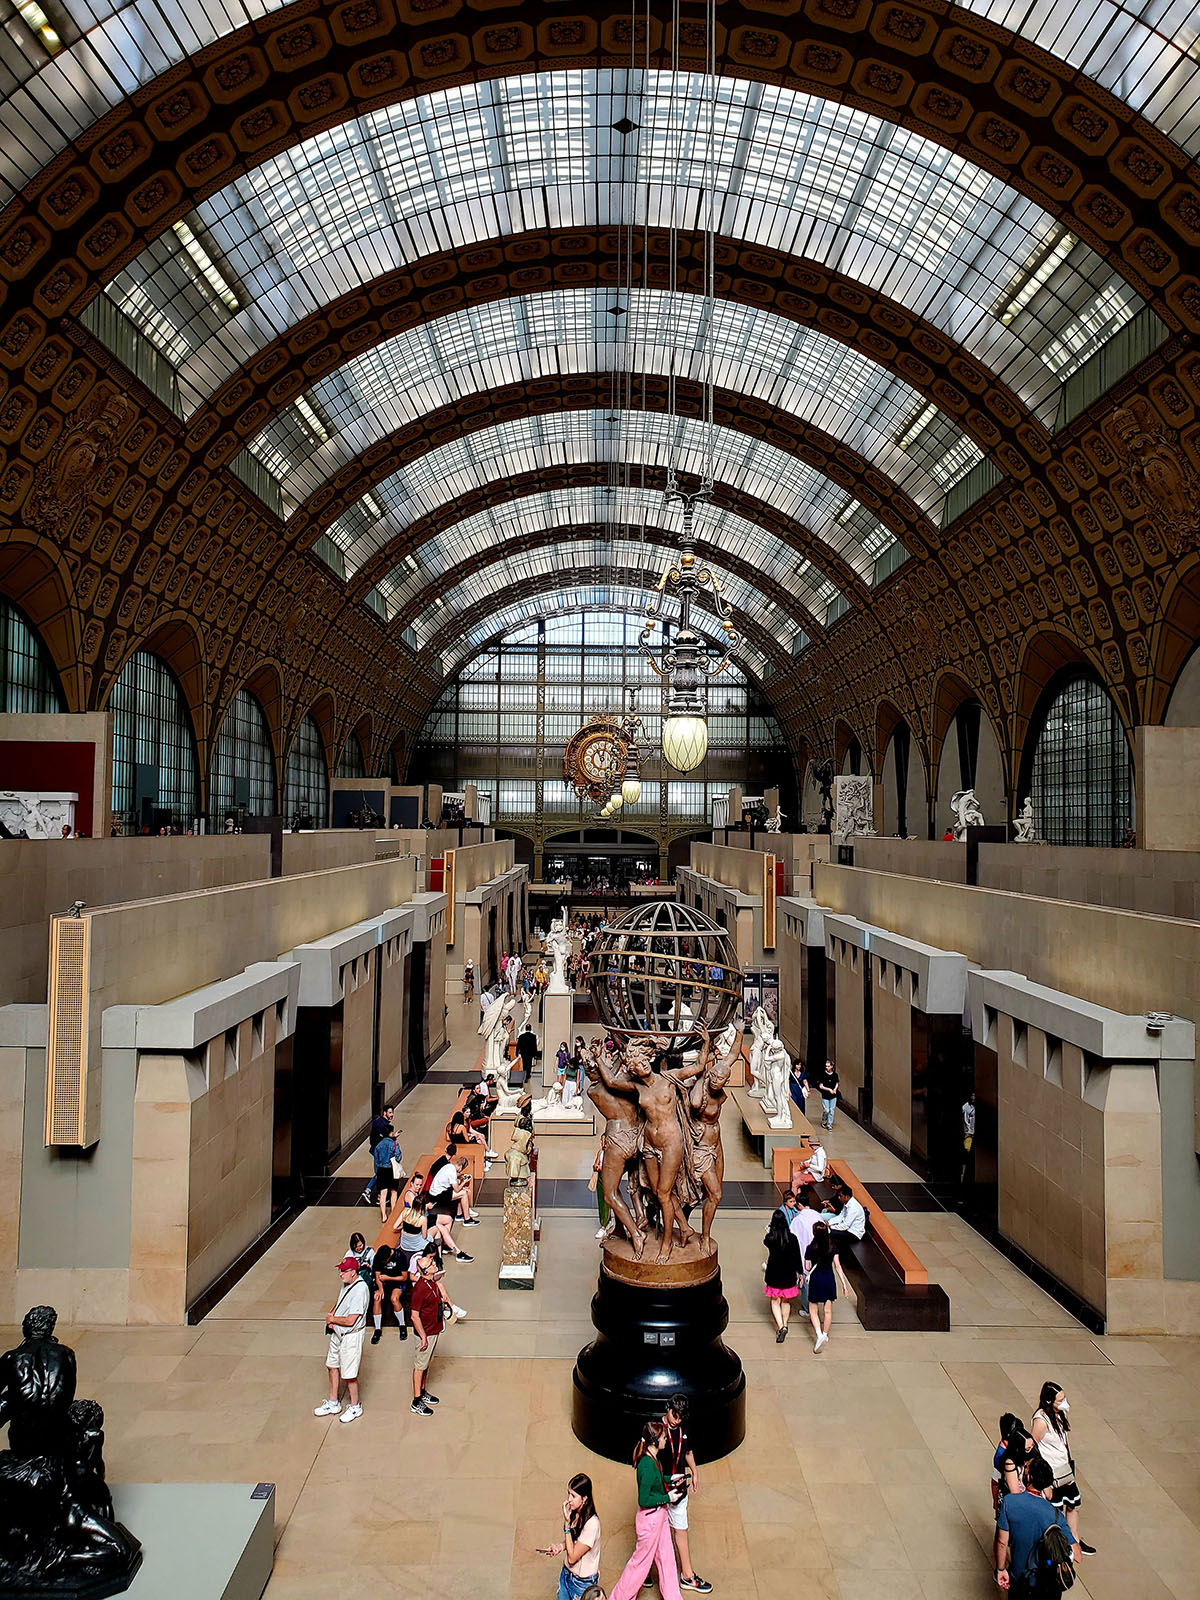 Inside the Musée d’Orsay with people wondering around looking at various sculptures.